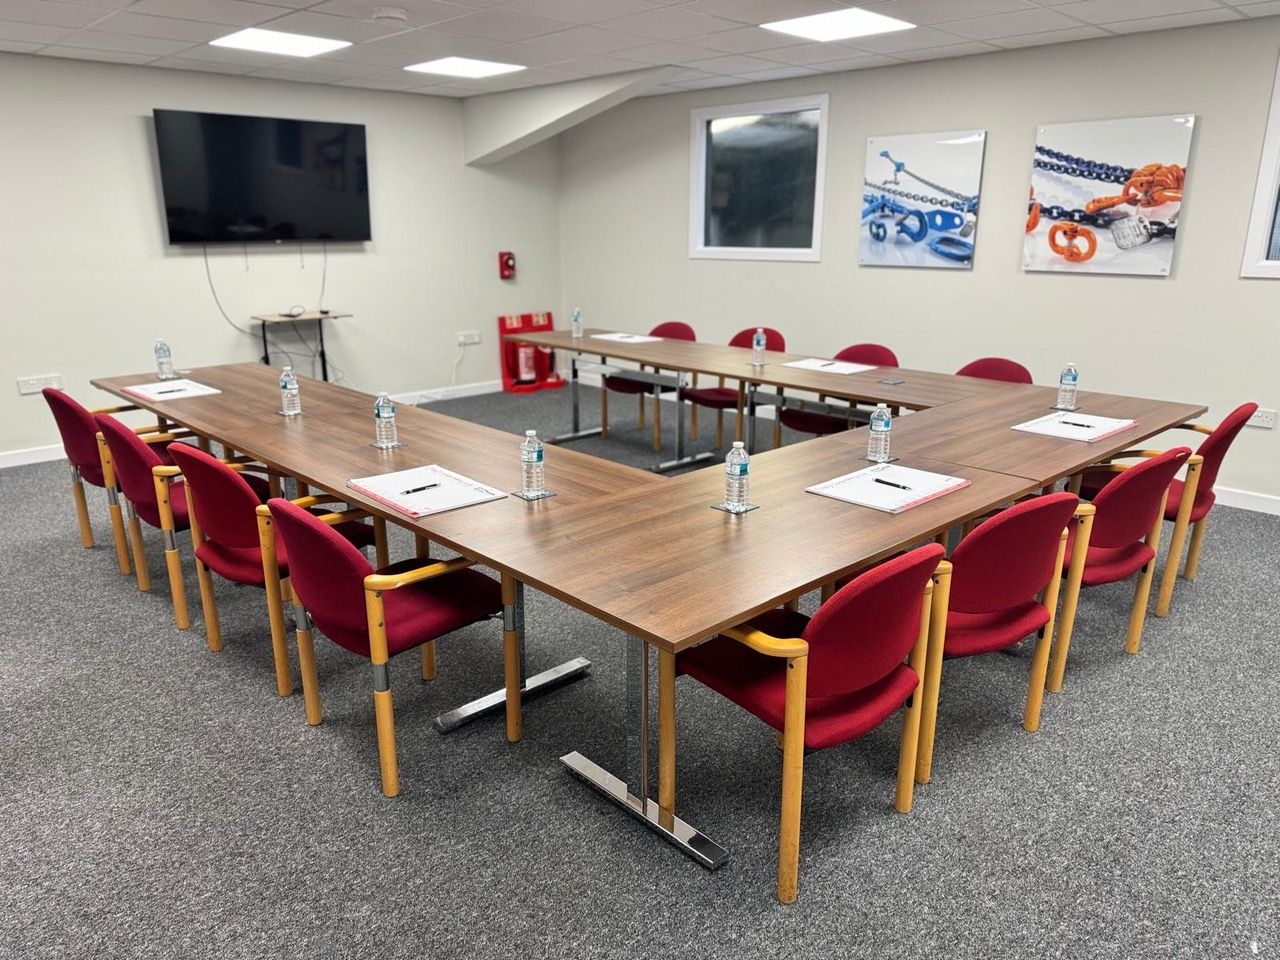 RSS’s Warrington facility includes a new training room.